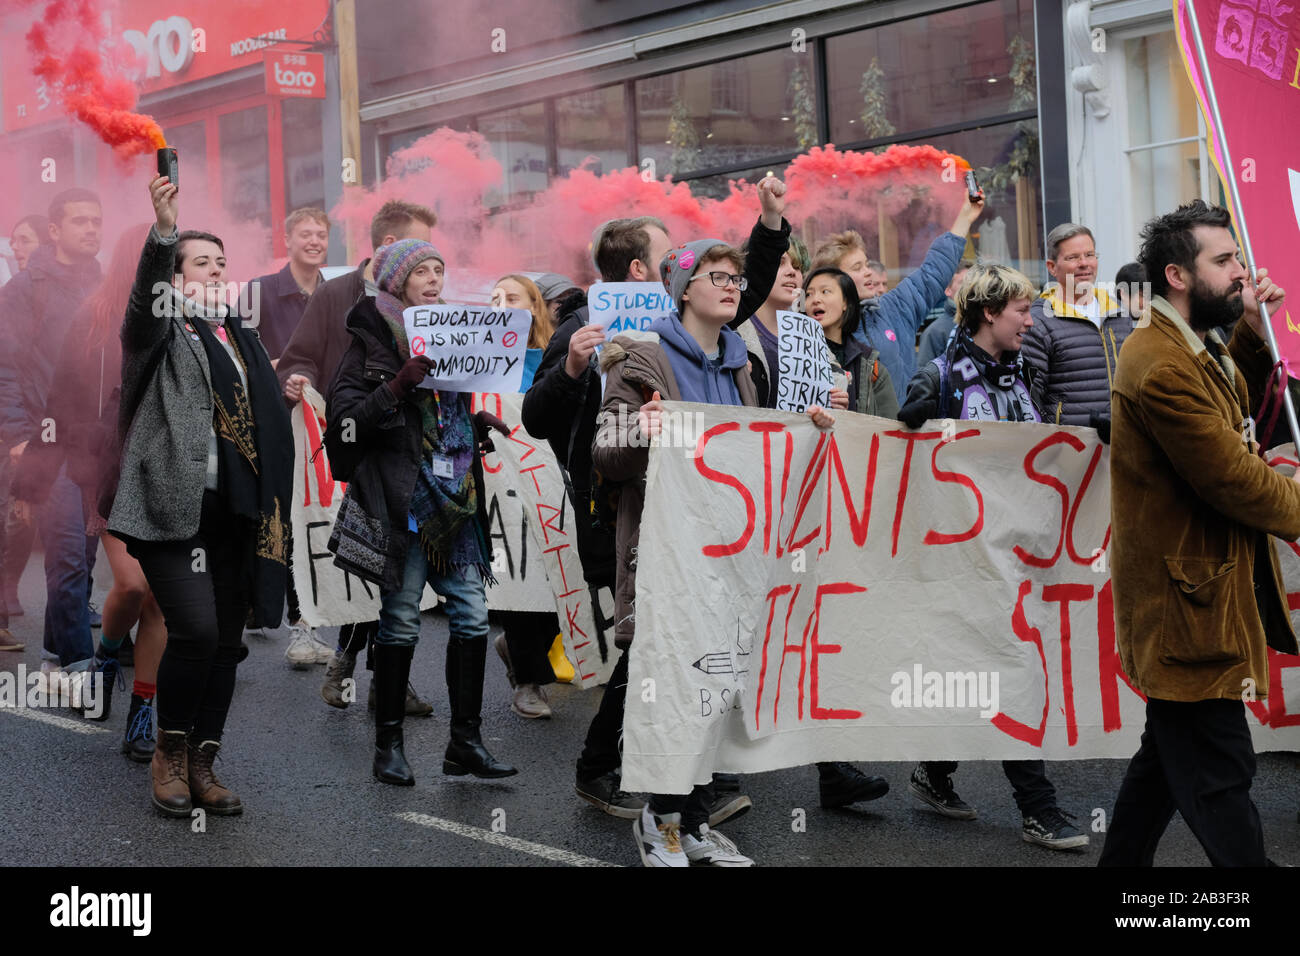 Bristol, UK, 25th November 2019. University lecturers have commenced a series of strikes protesting changes to their Pension Scheme. The University and College Union (UCU) lecturer strike was supported by students and other local groups. A group gathered outside the Victoria Rooms, and after speeches and protests the rally passed peacefully down Park Street and dispersed on College Green. Credit: Mr Standfast/Alamy Live News Stock Photo